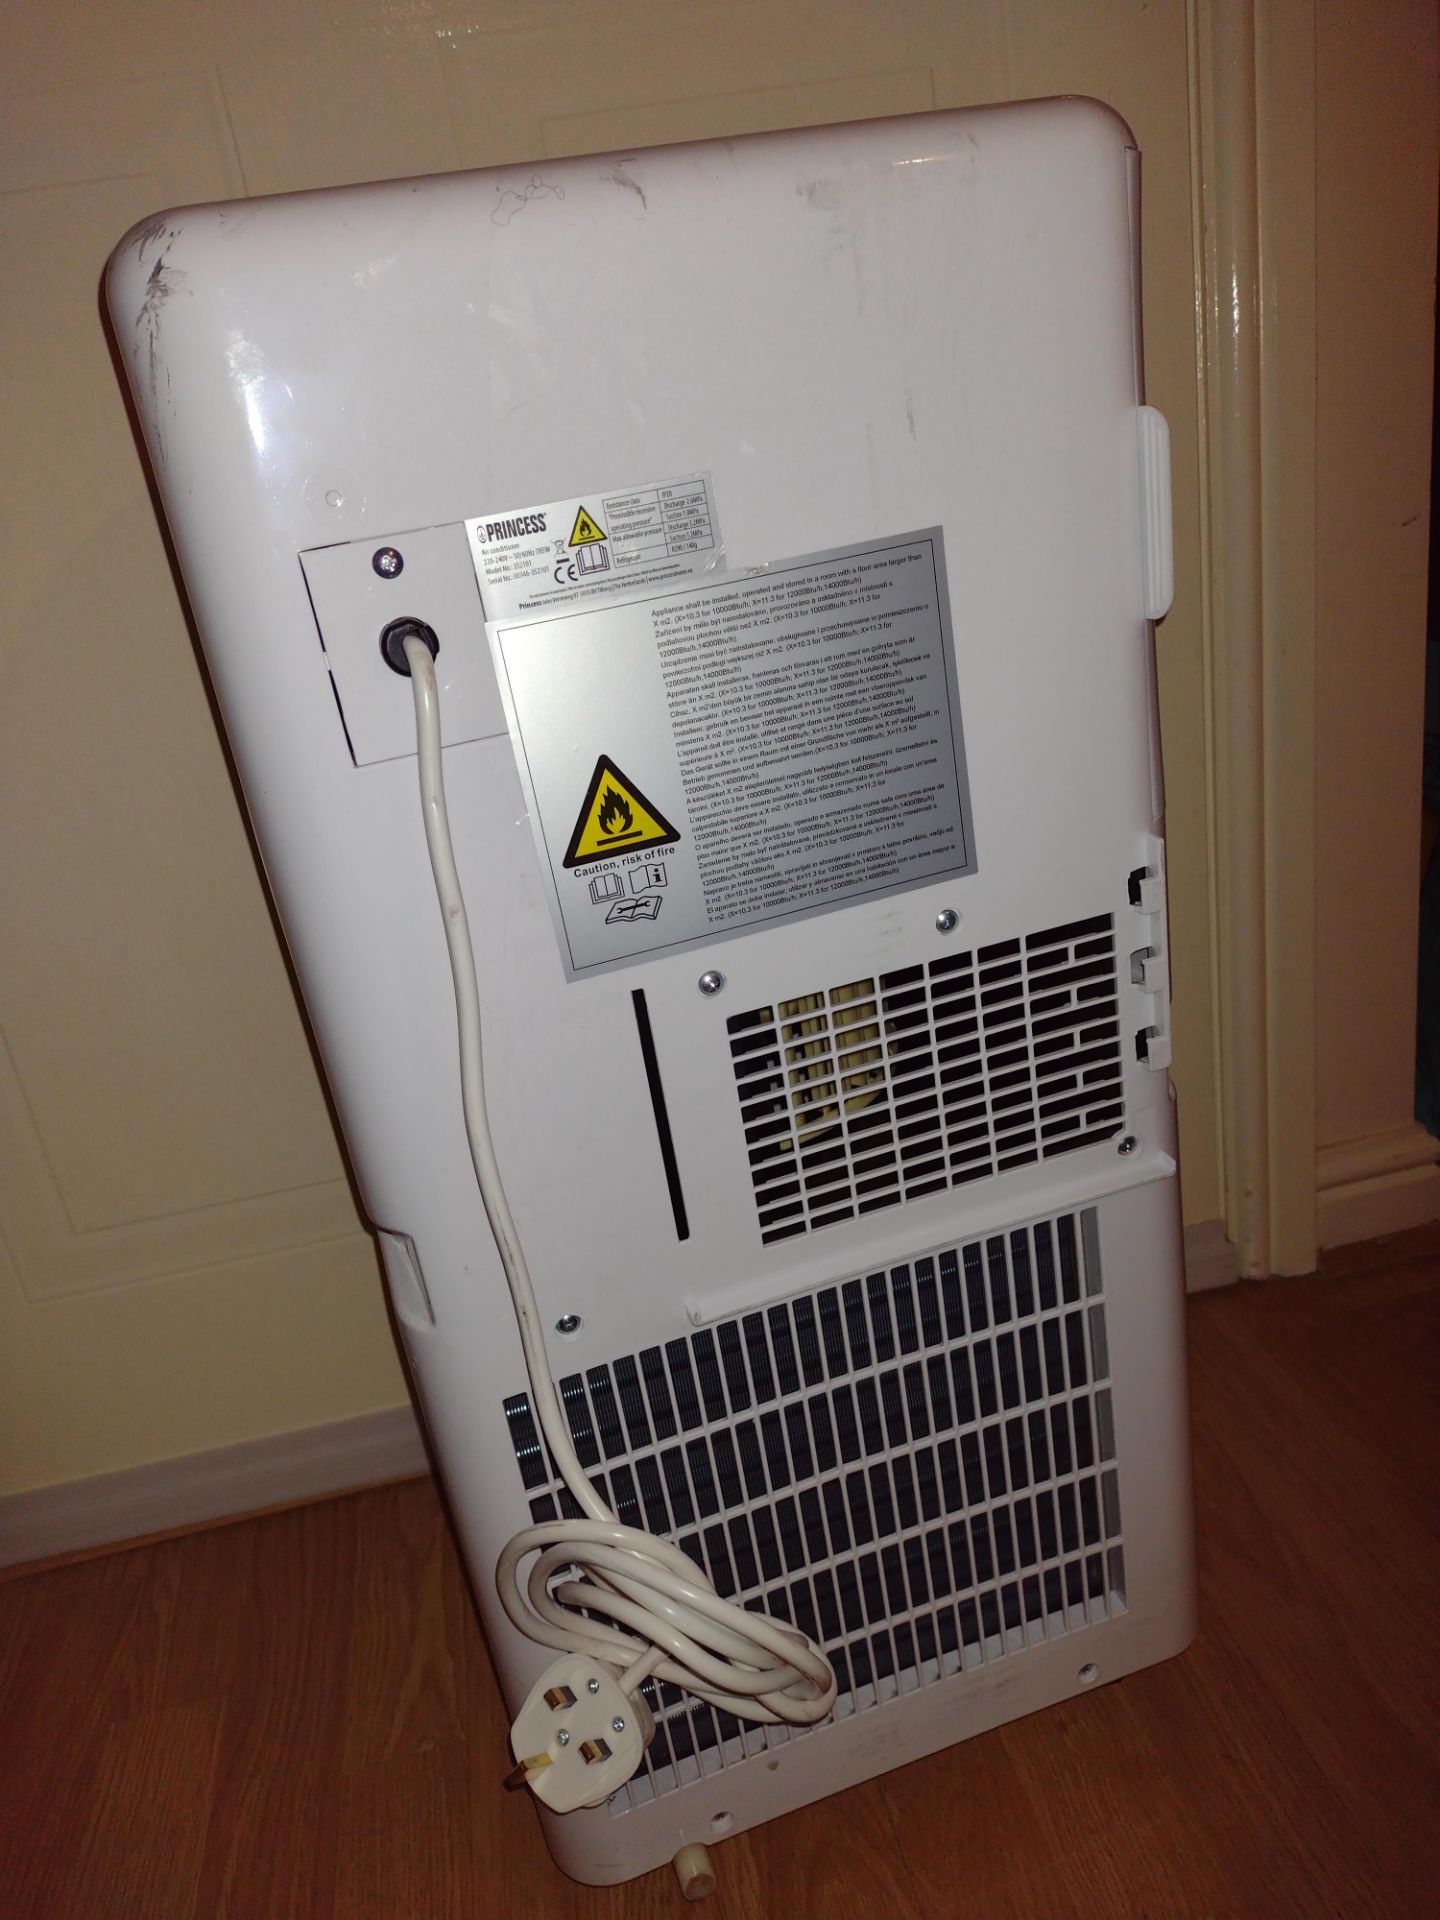 Princess 7000BTU/h 785w A-Energy Rated 3-in-1 Portable Air Conditioner (RRP £300) - Image 3 of 4